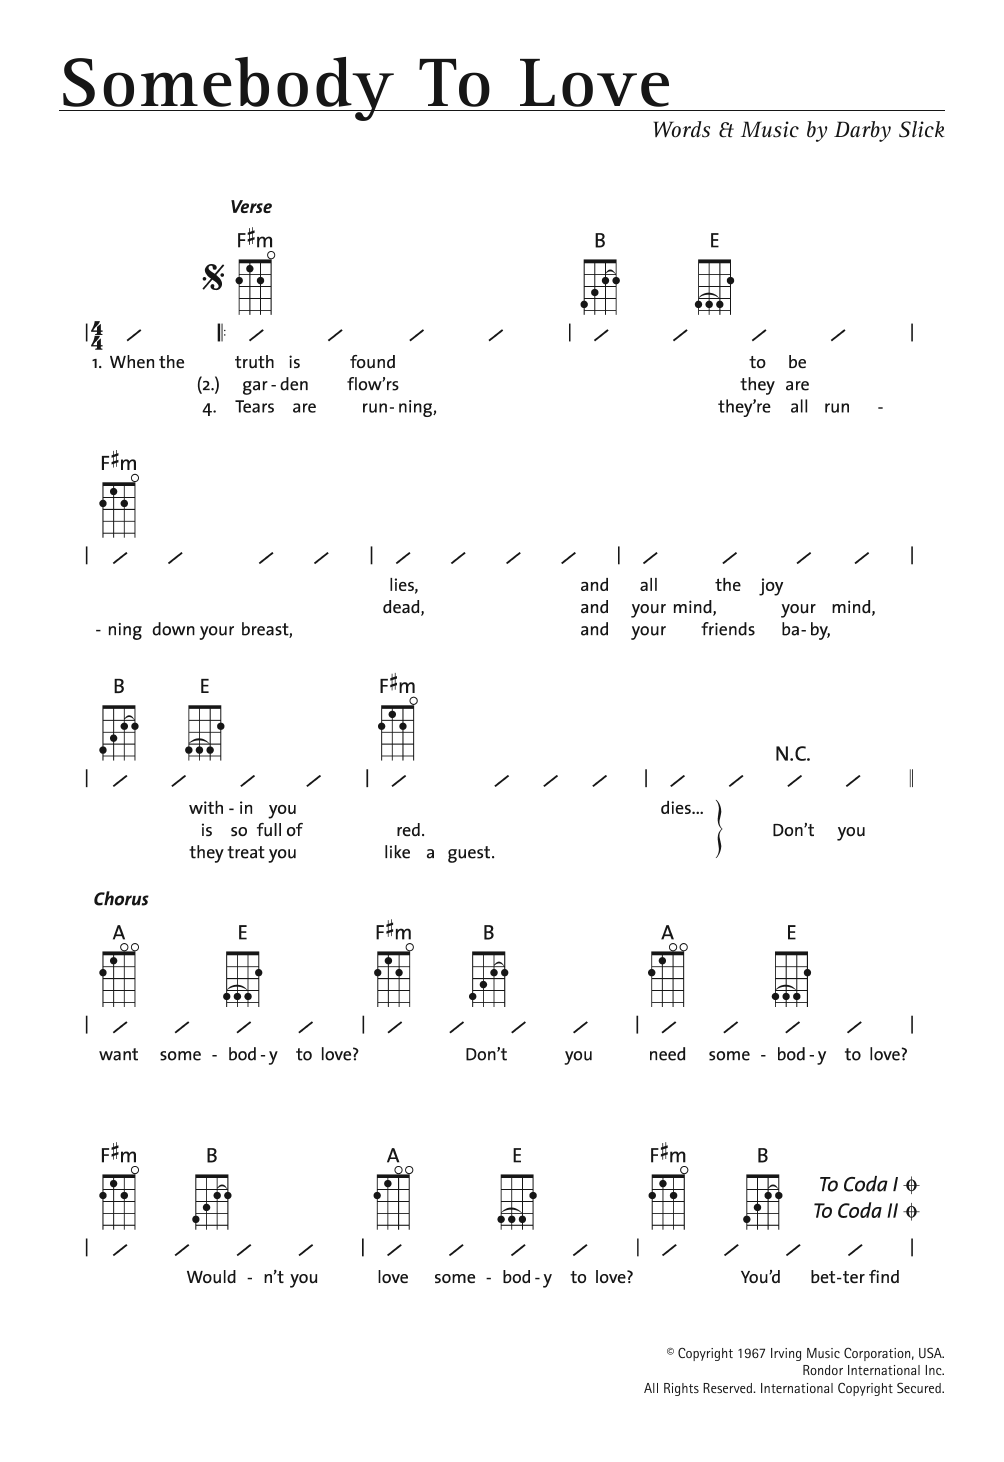 Download Jefferson Airplane Somebody To Love Sheet Music